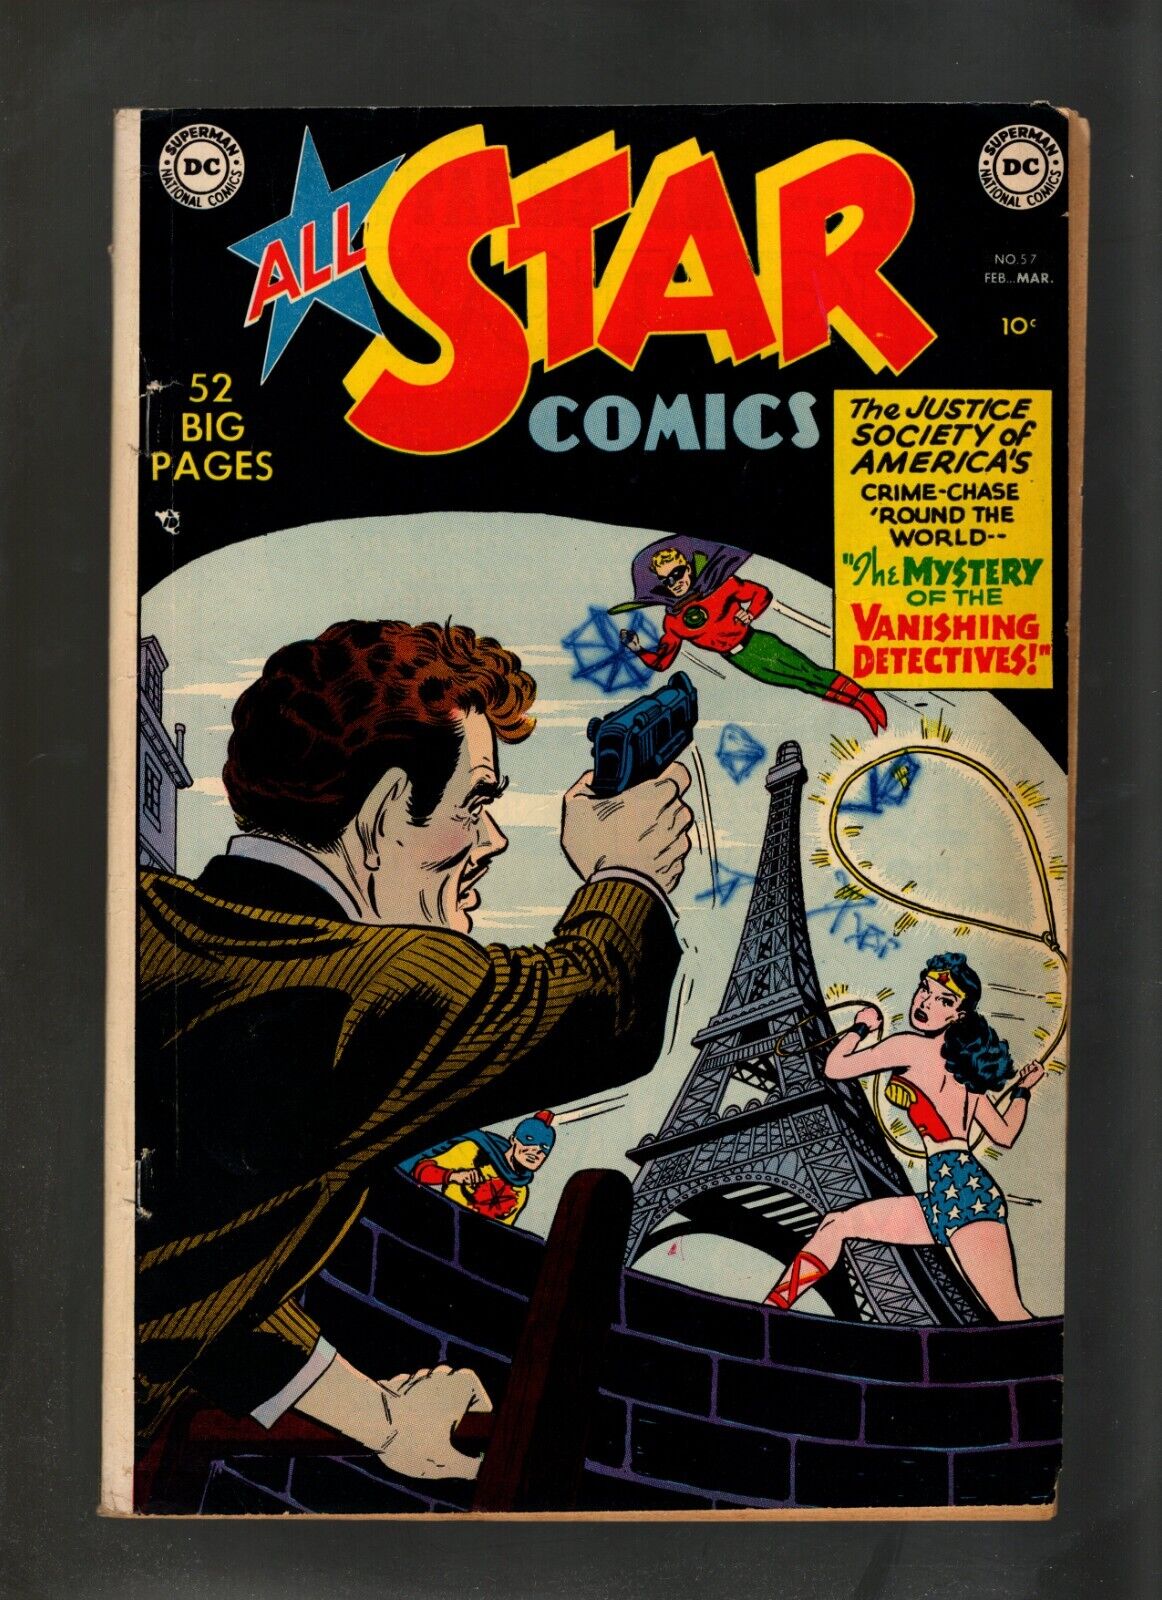 ALL STAR COMICS #57, GOLDEN AGE, DC COMICS, 1951, LAST ISSUE, INCOMPLETE